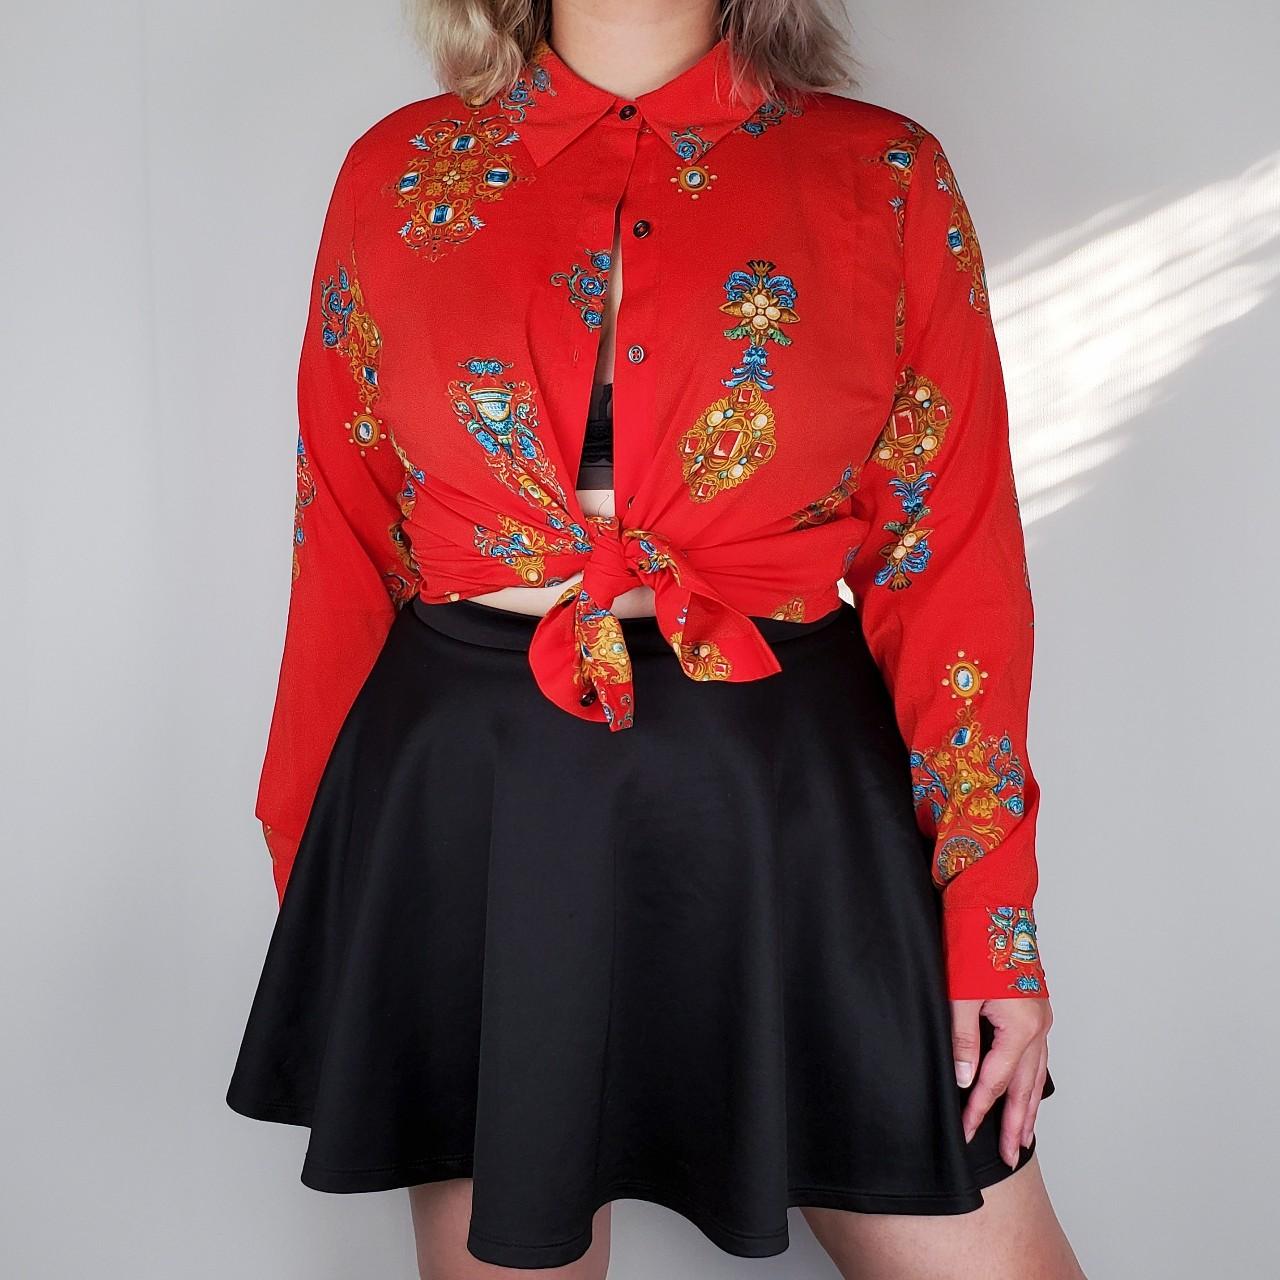 Women's Red and Gold Blouse